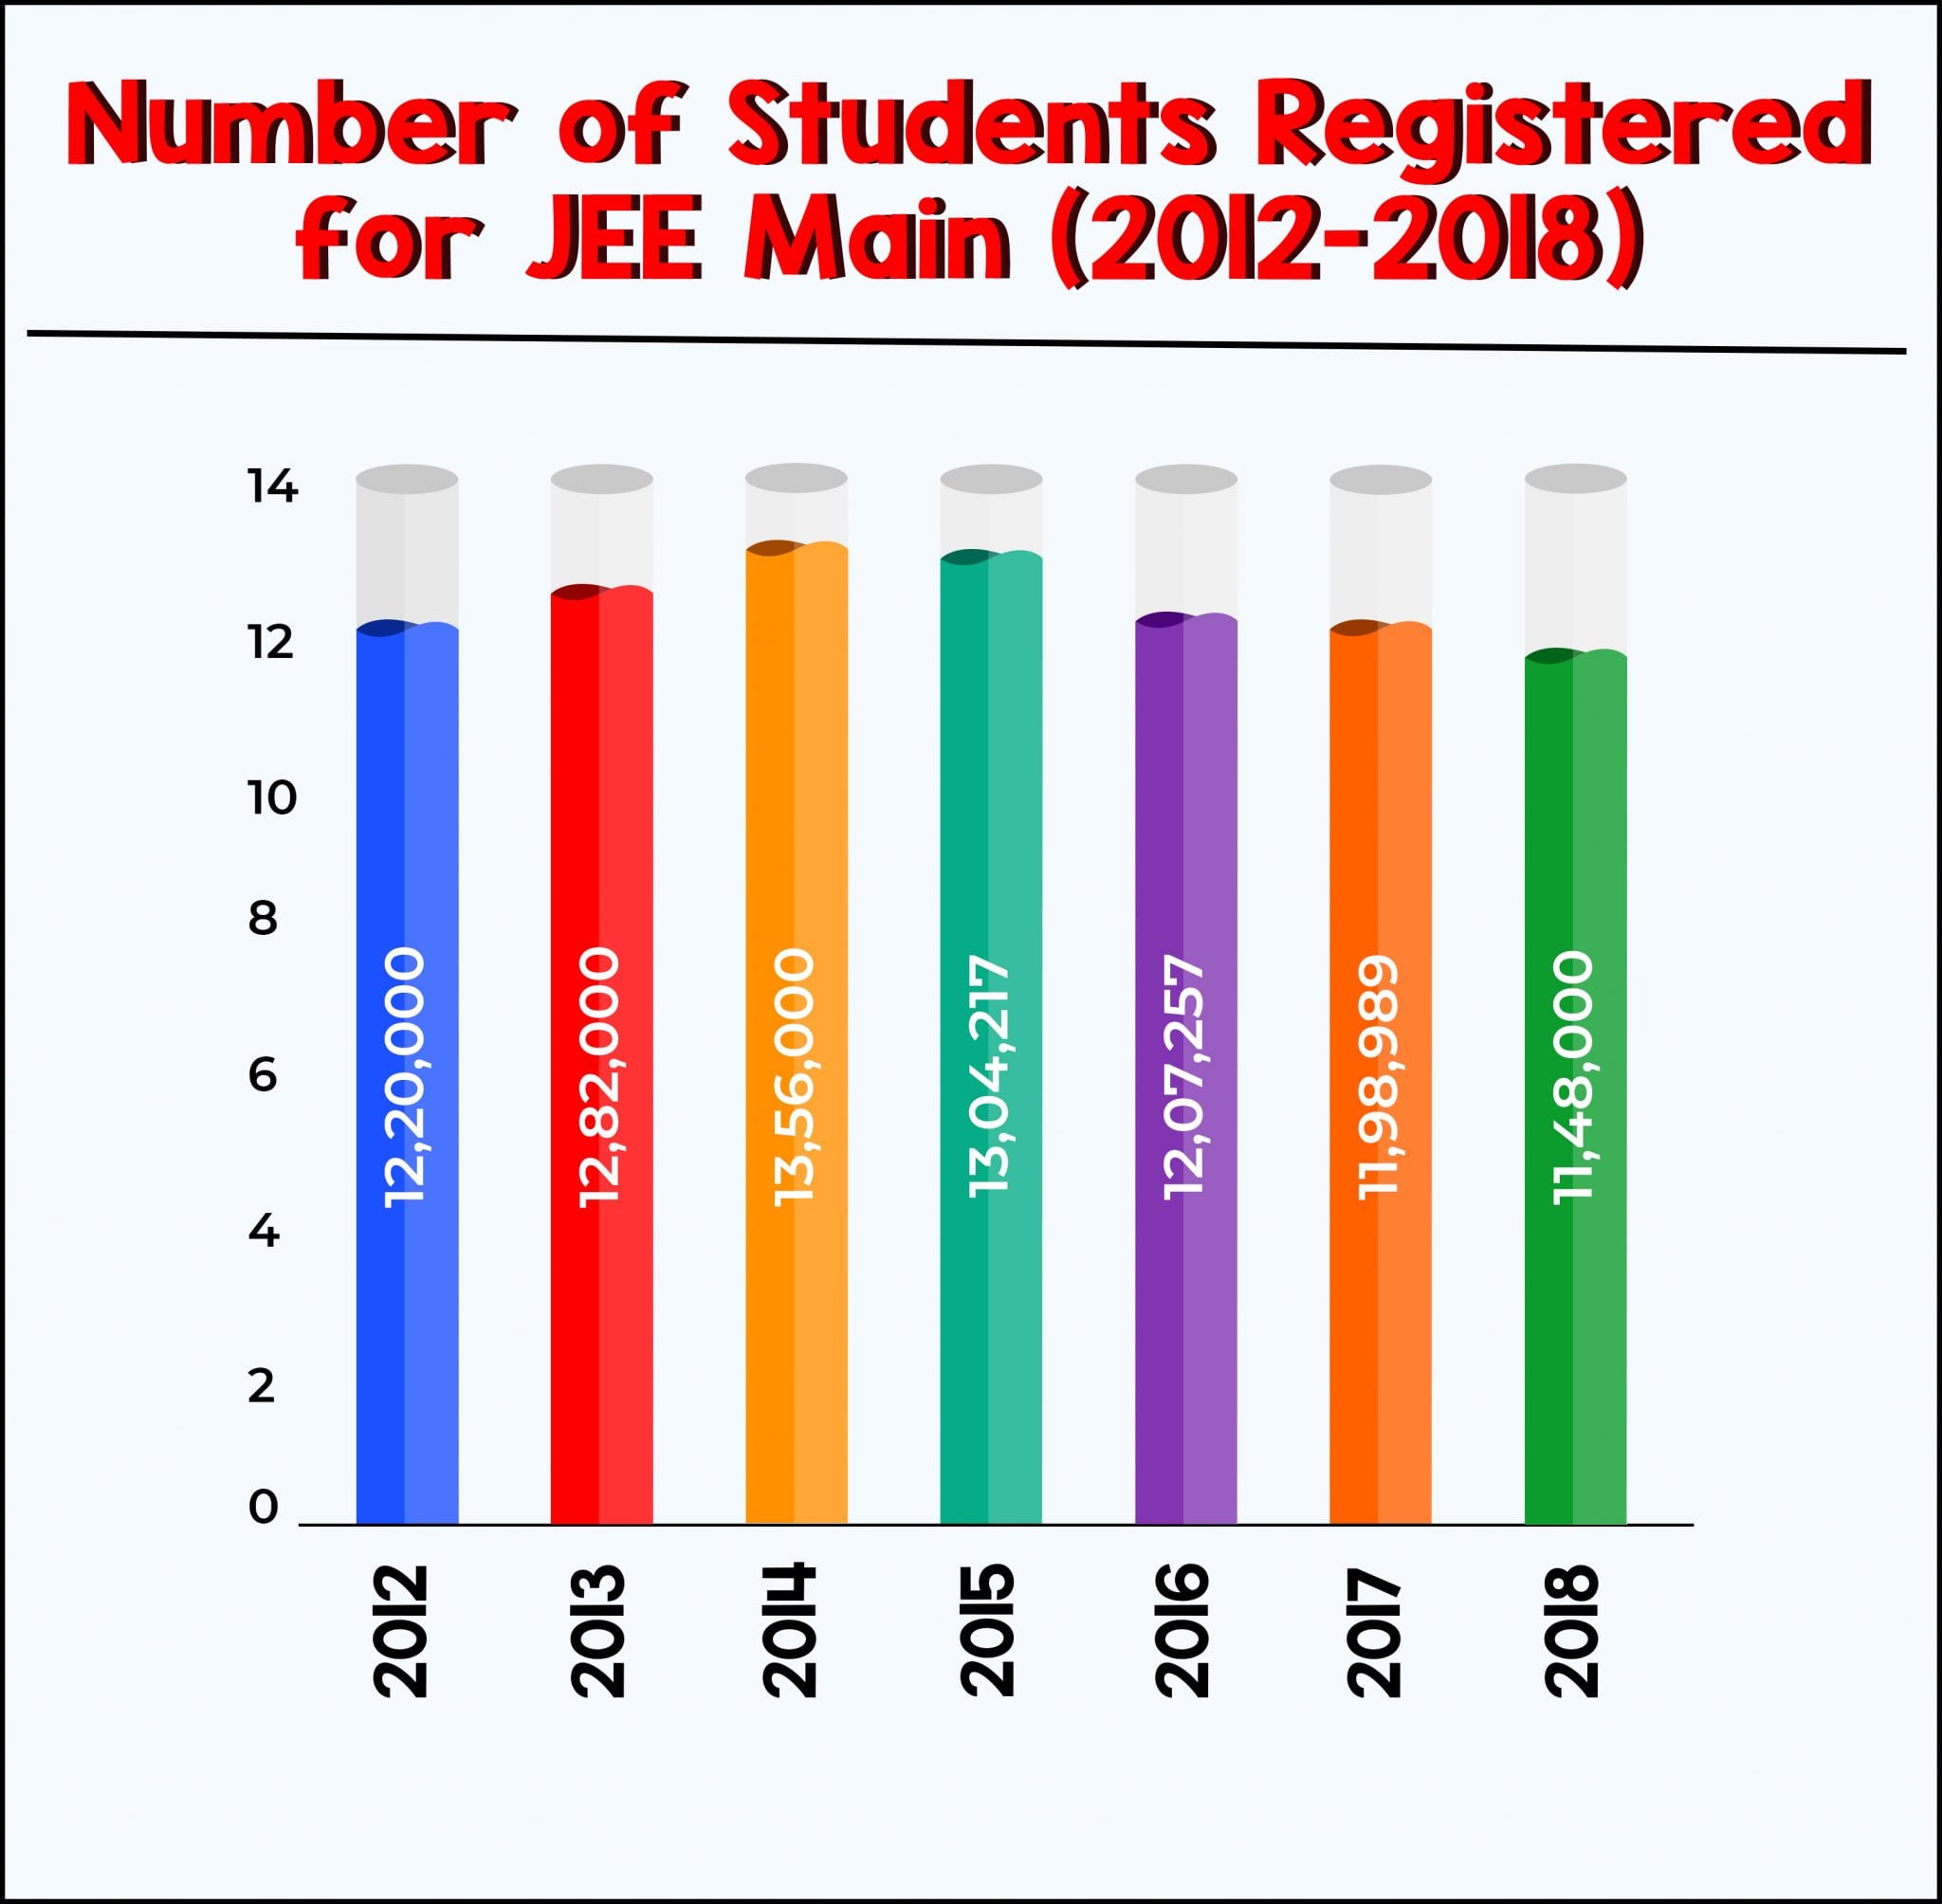 Number of Students Registered for JEE MAIN